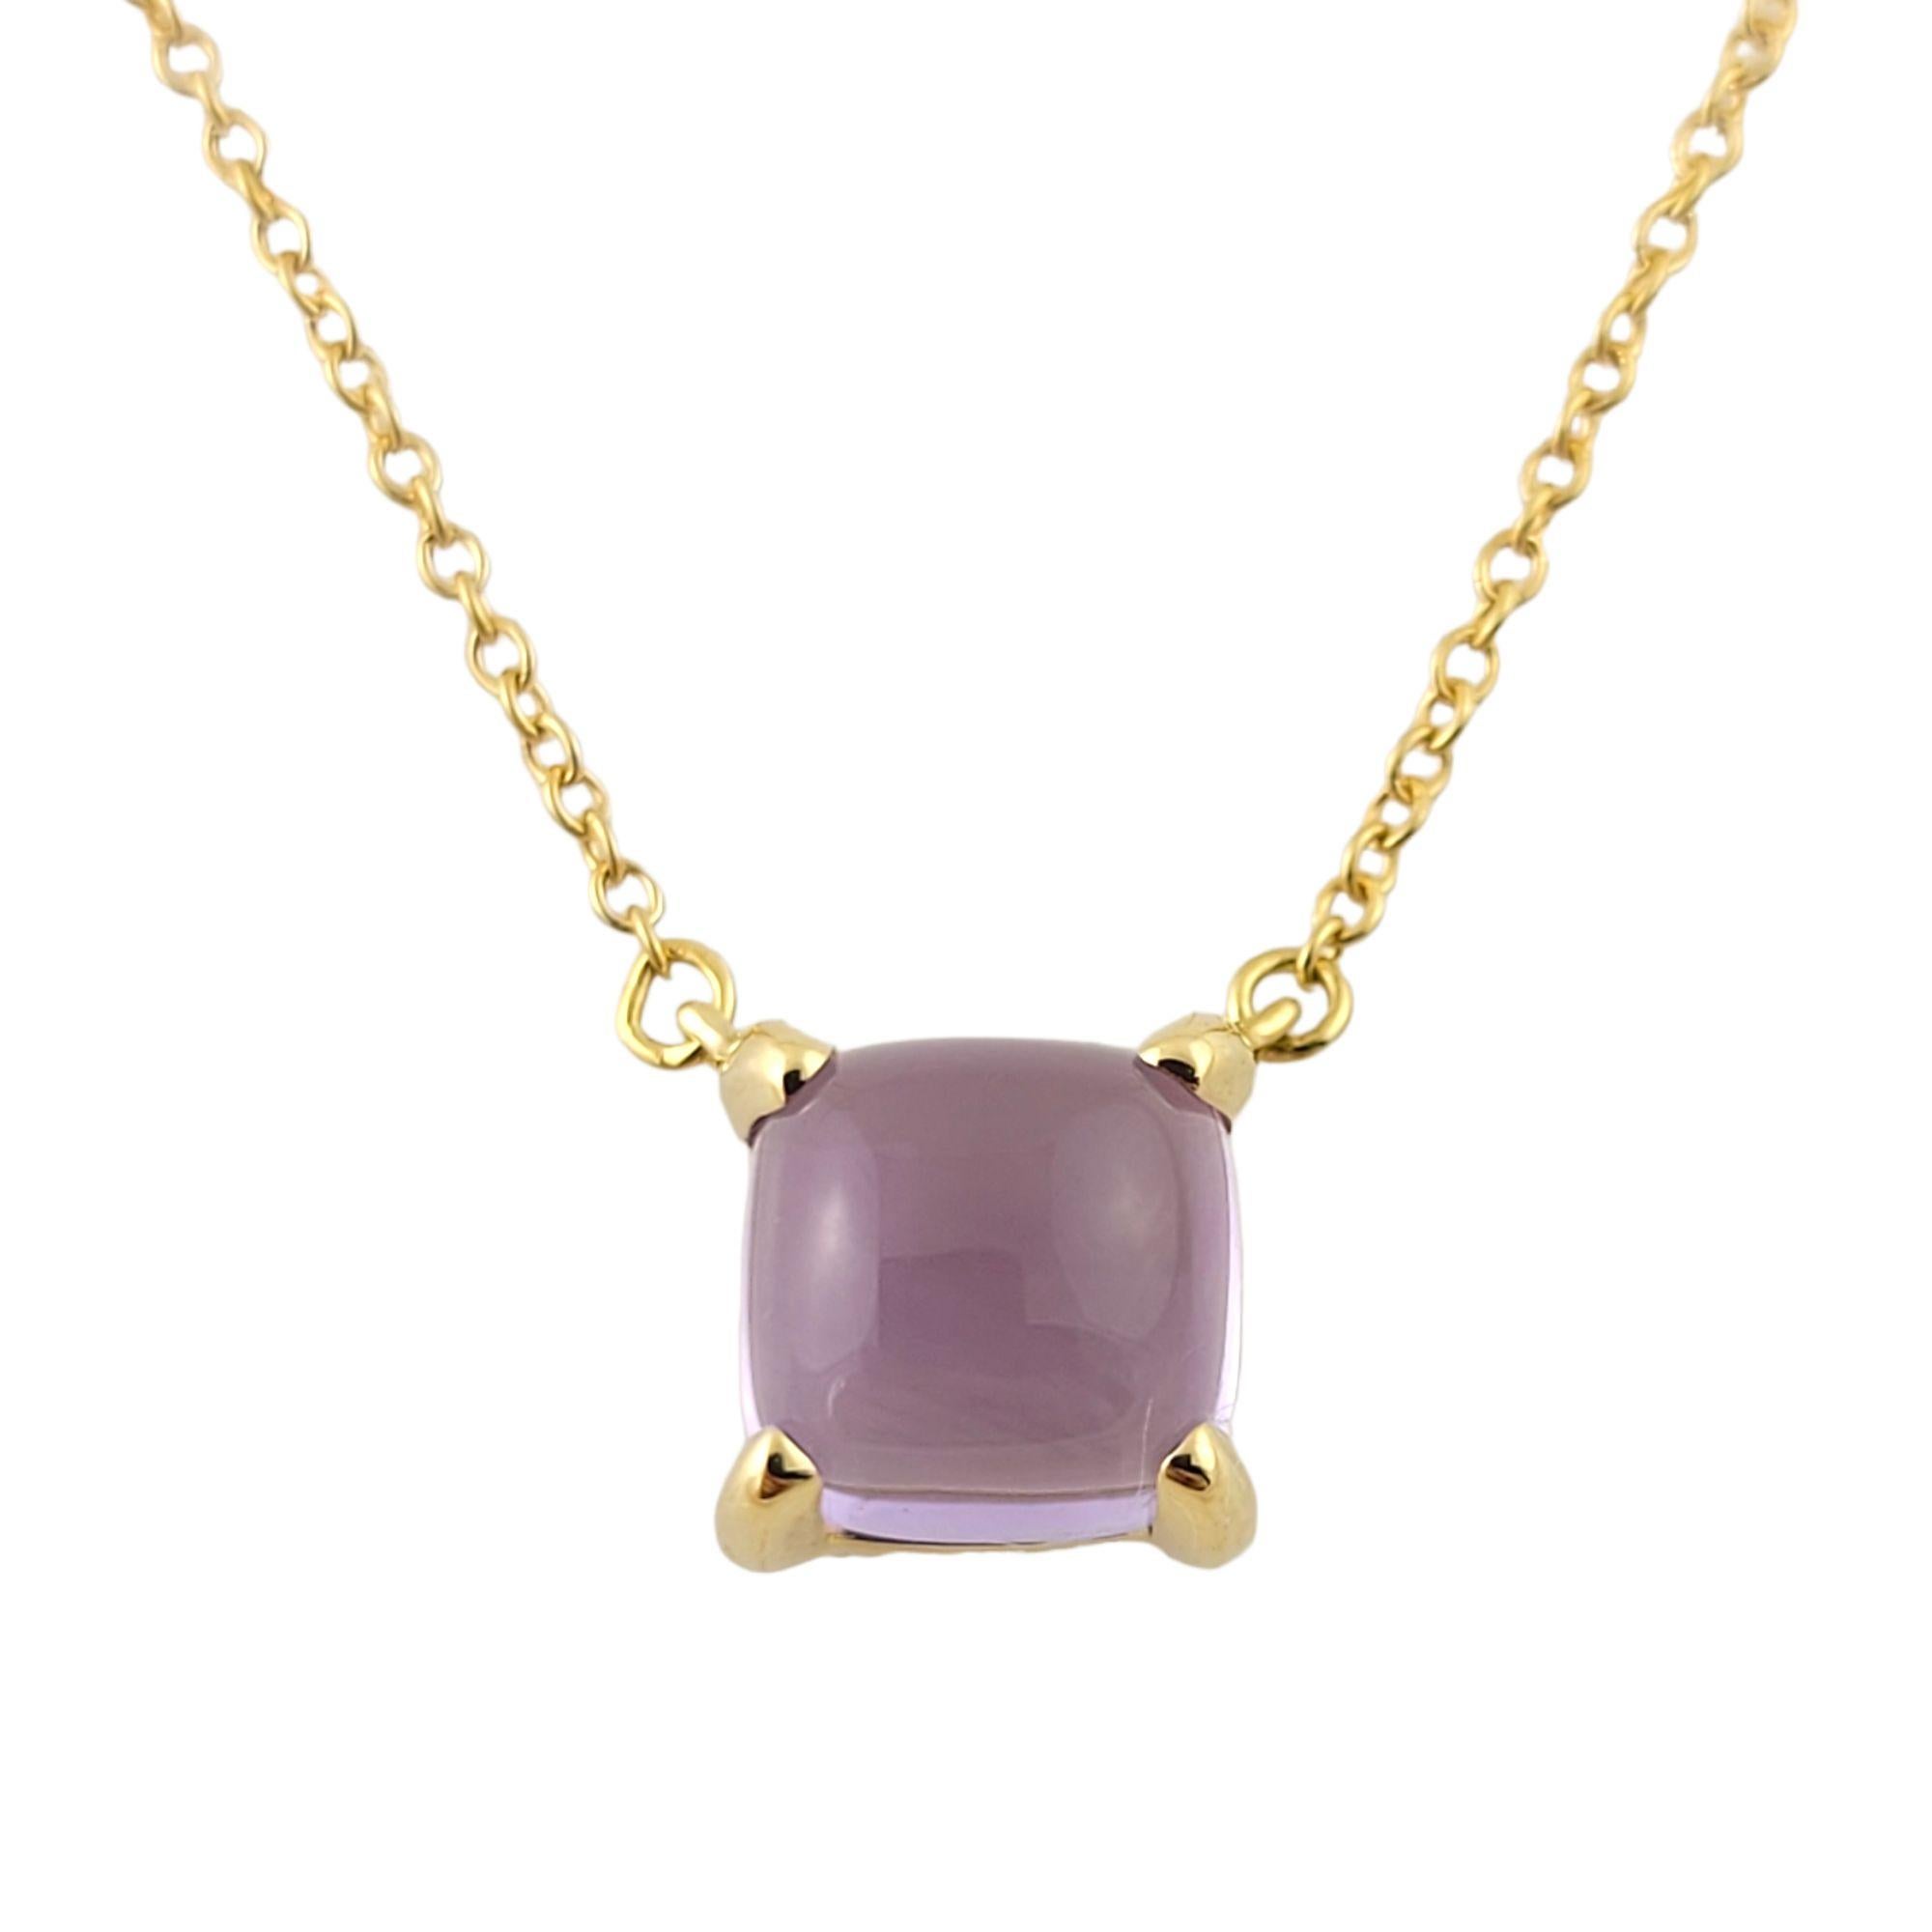 Tiffany & Co. Paloma Picasso 18K Yellow Gold Amethyst Sugar Stack Necklace

This amethyst necklace was designed by Paloma Picasso for Tiffany & Co.

Necklace is approx. 16